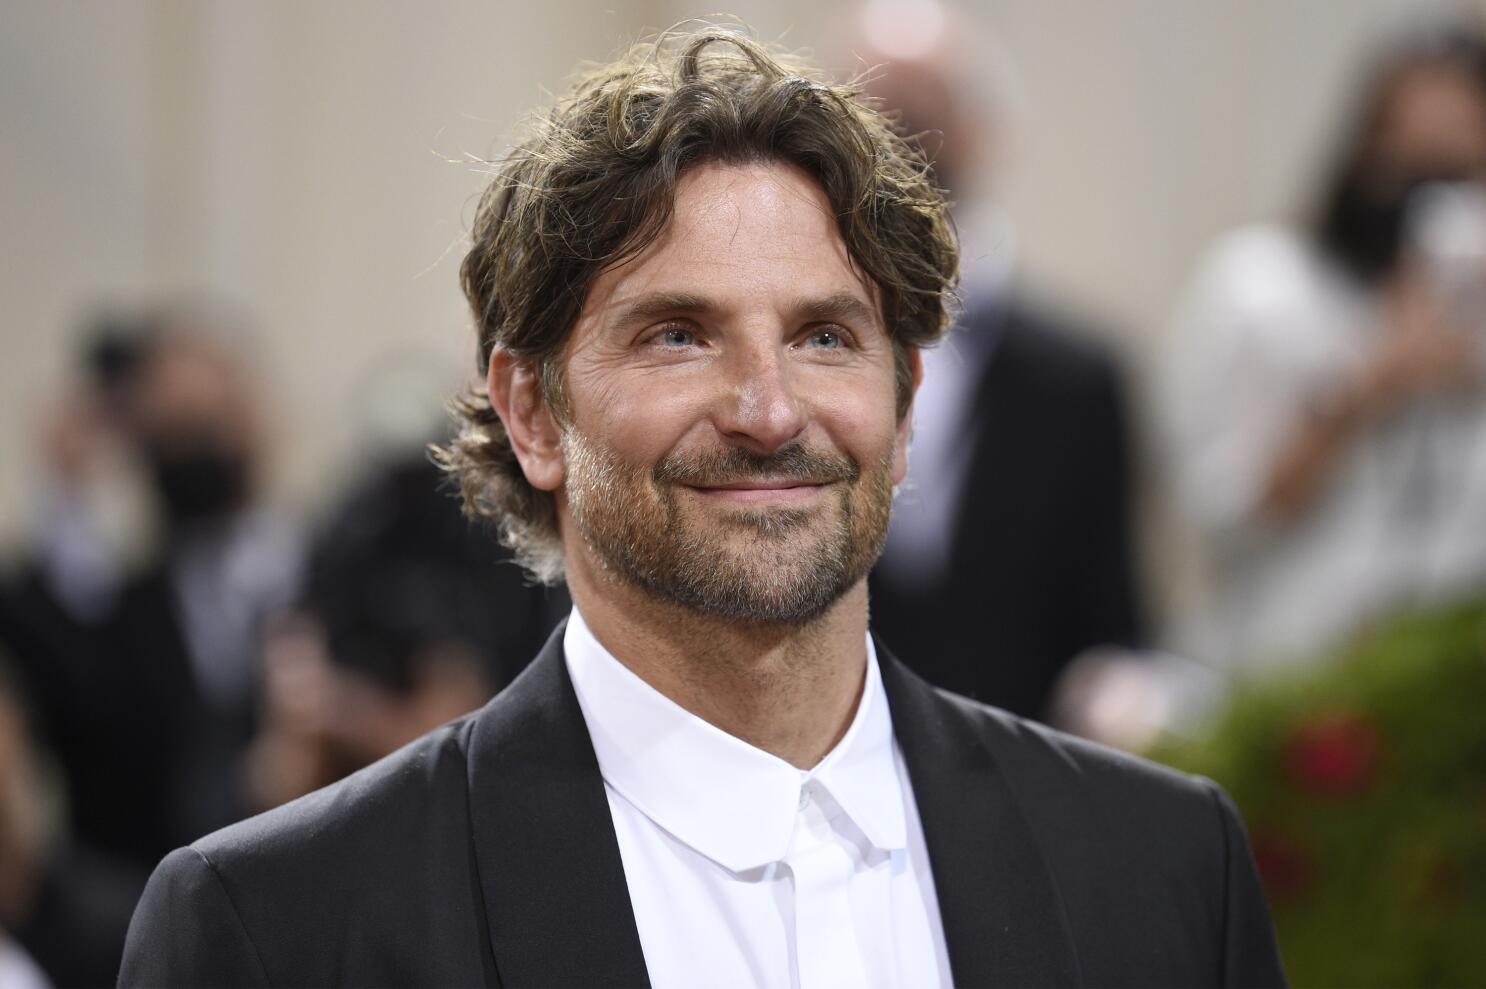 Upcoming Bradley Cooper Movies: What's Ahead For The Actor And Director